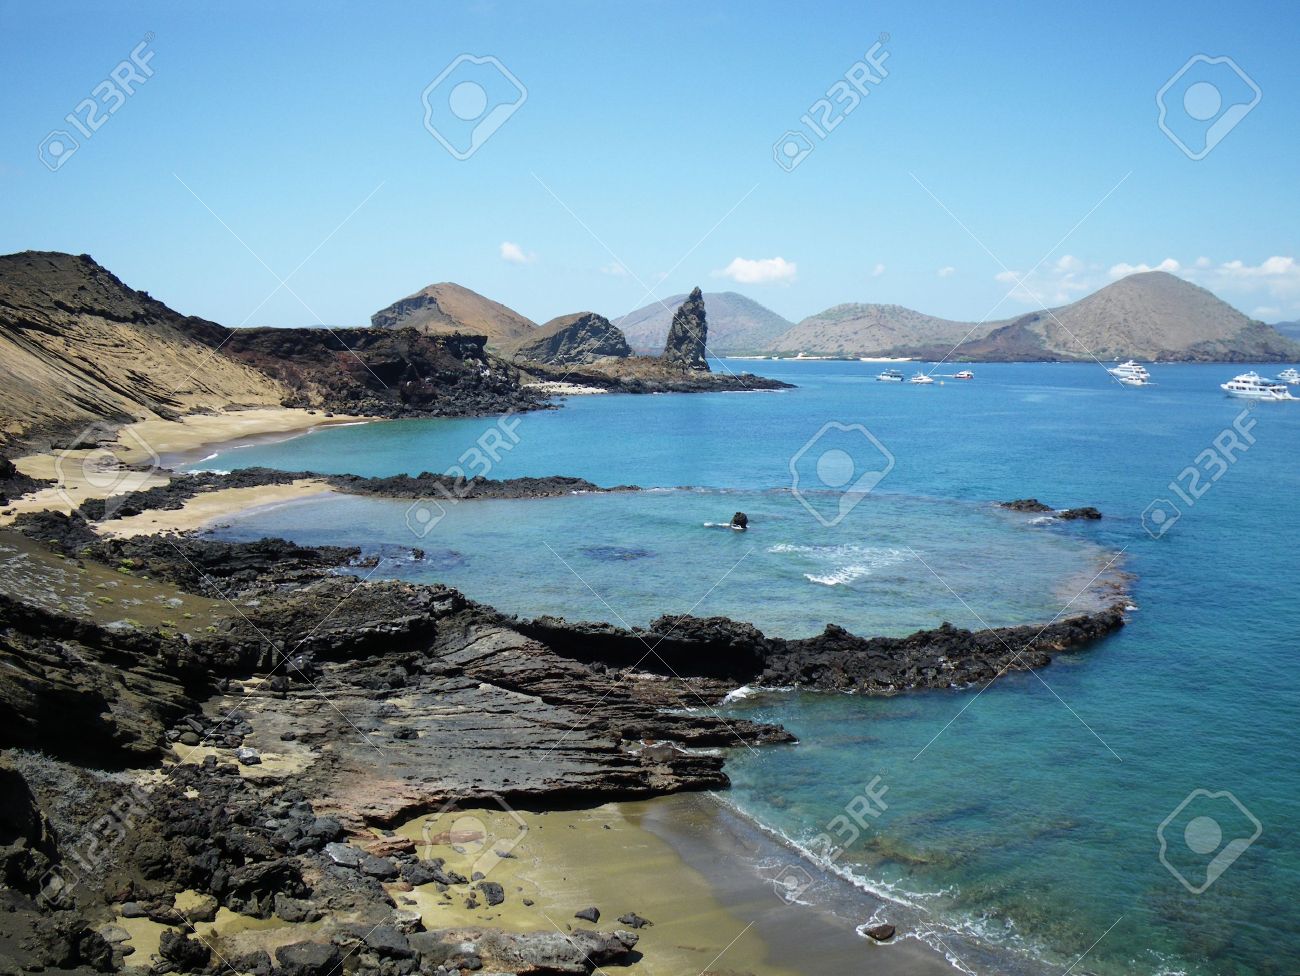 6217628-Submerged-volcanic-crater-with-Pinnacle-Rock-in-background-Island-Bartolome-Galapagos-Islands-Ecuado-Stock-Photo.jpg